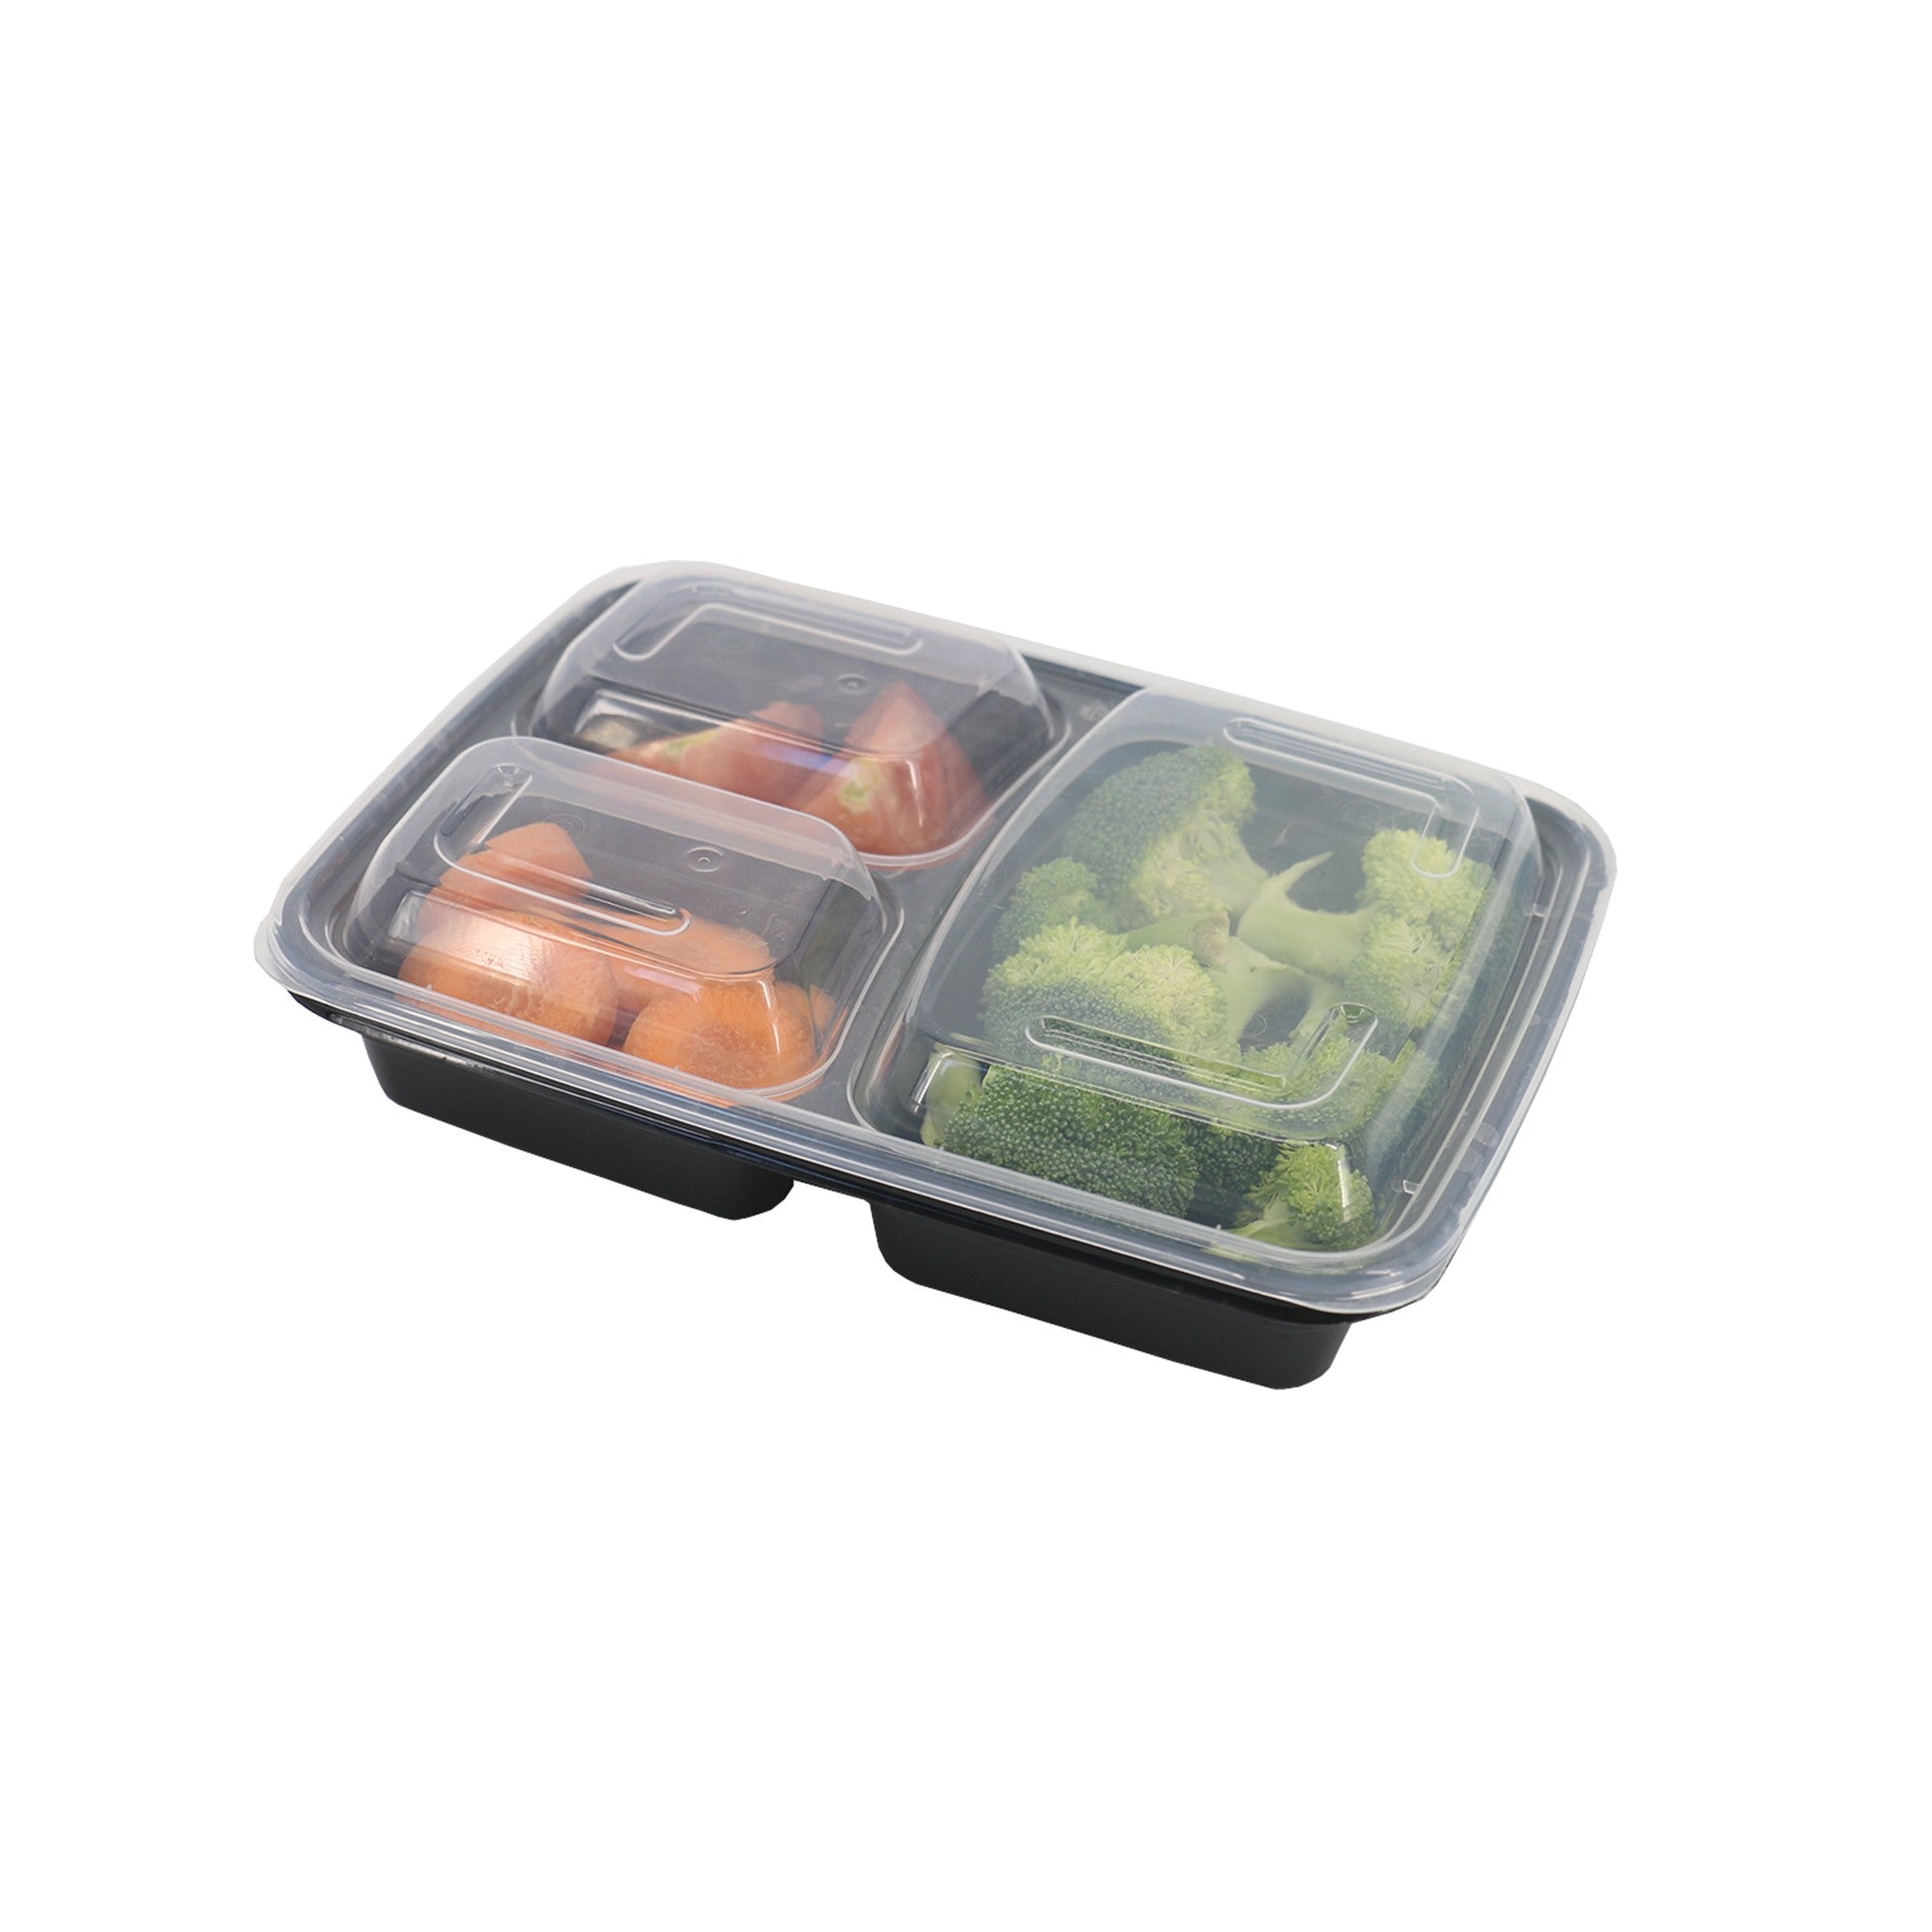 Leyso TO-JH333 33oz Three Compartments Bento Box Food Container with Clear Lid - Microwave, Dishwasher Safe